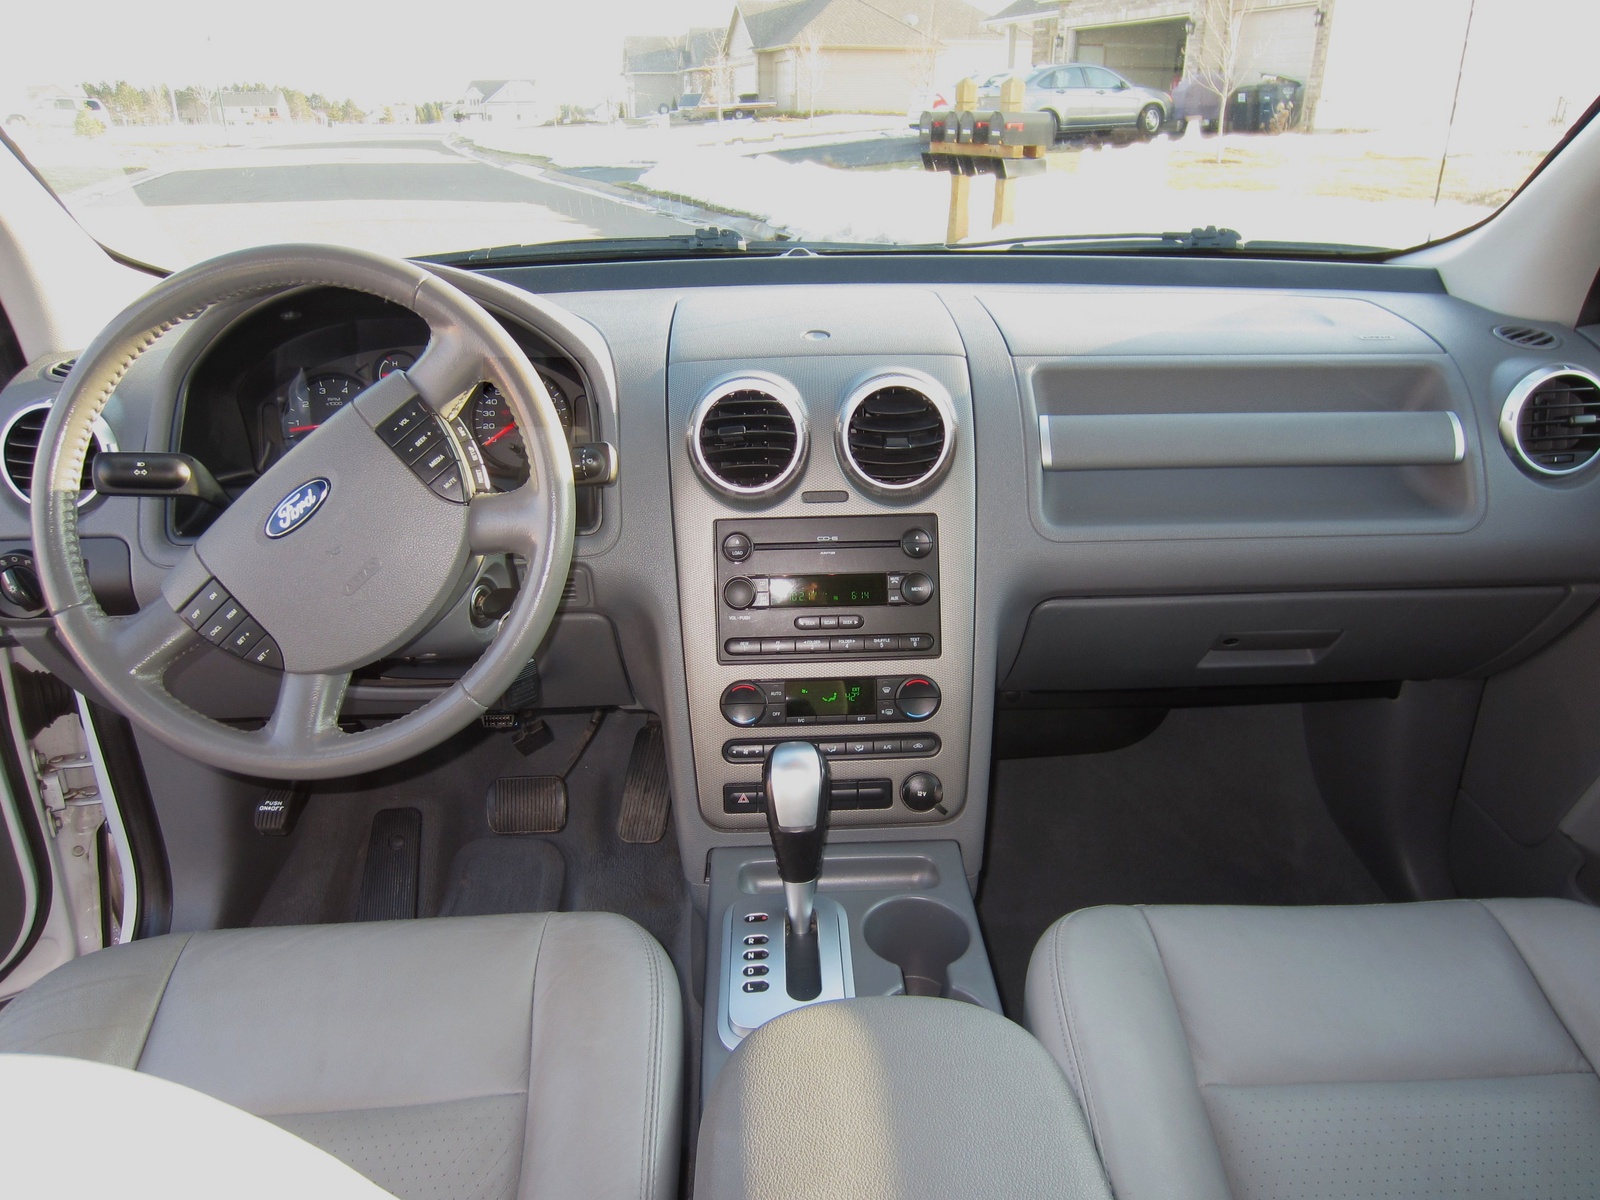 Ford freestyle pictures interior